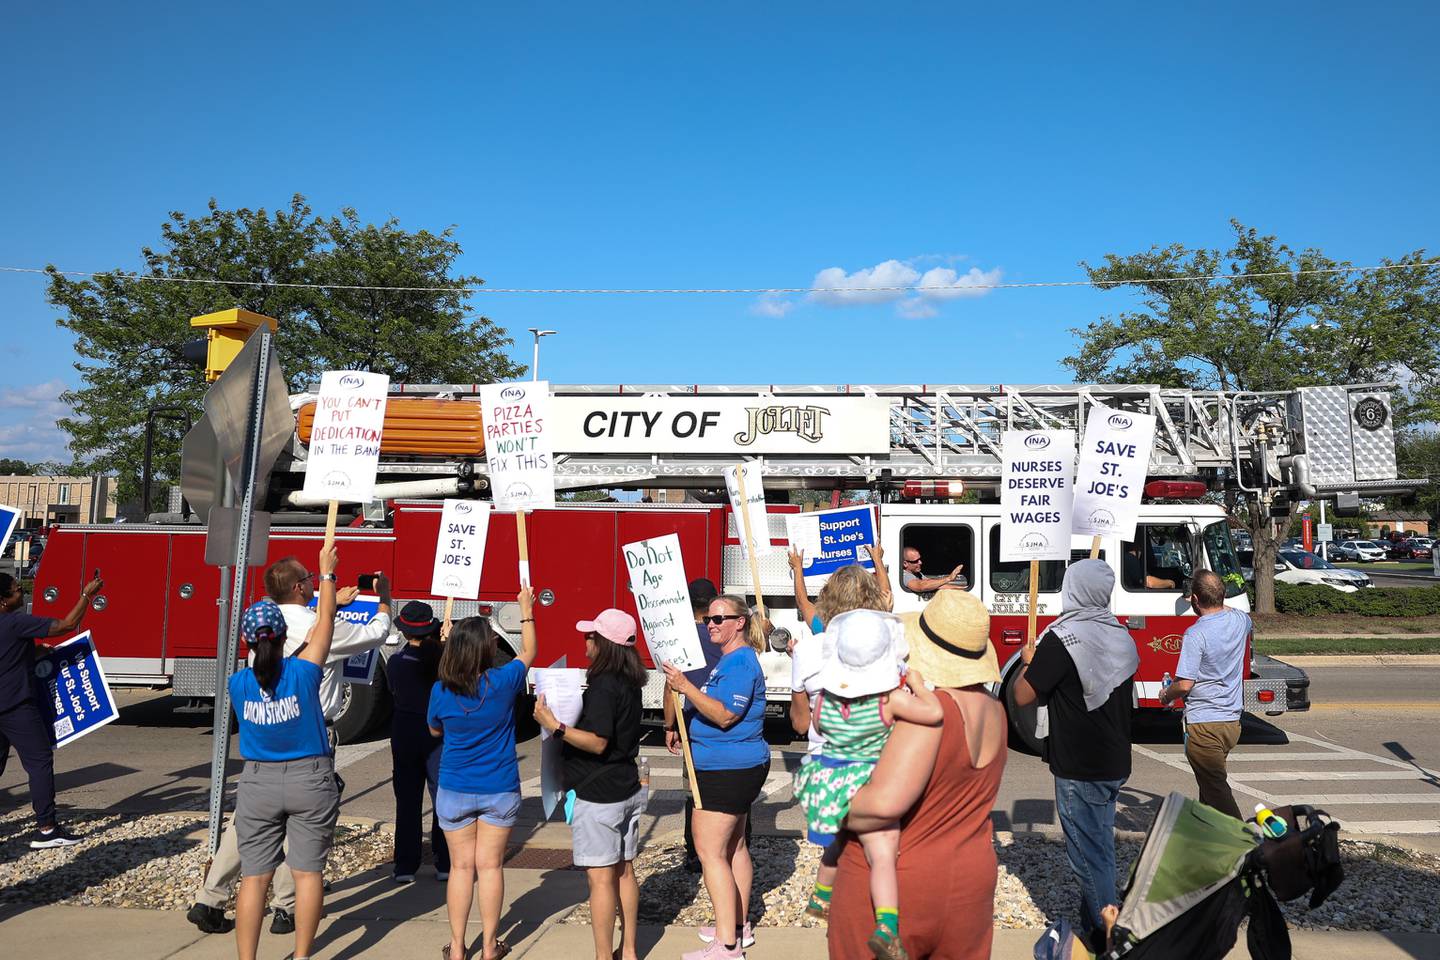 Joliet Fire Department shows their support during a picket outside St. Joseph Hospital as nurses contract negotiations continue on Thursday, July 20th, 2023 in Joliet.